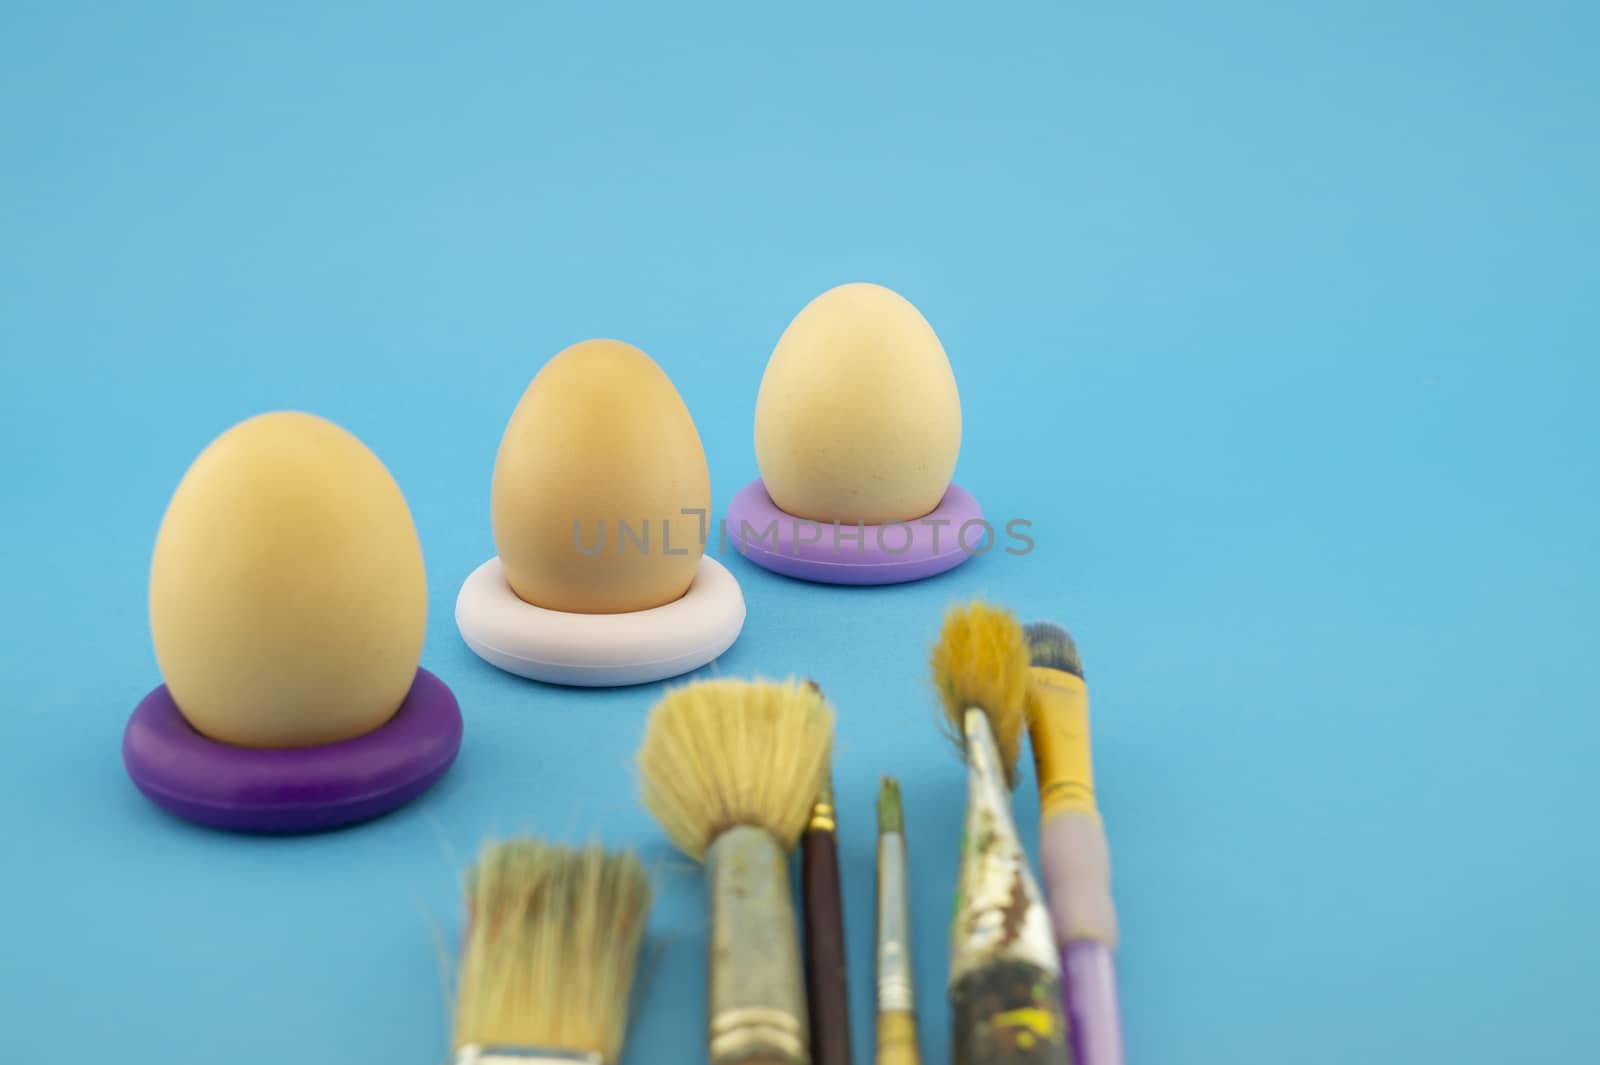 Easter eggs coloring concept with three unpainted eggs and set of different paint brushes, on blue background